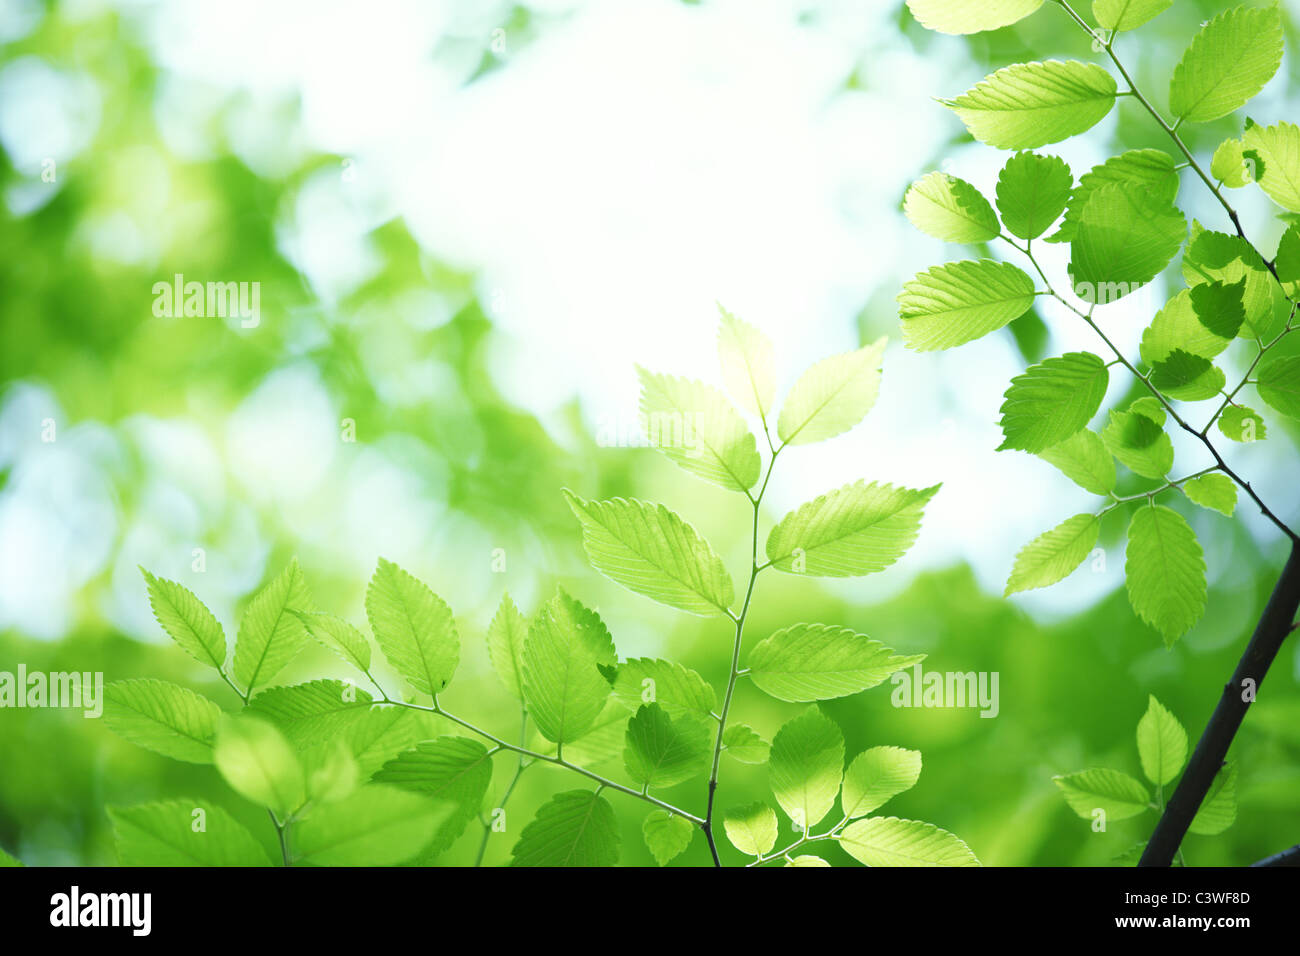 Green leaves against bright sky Stock Photo